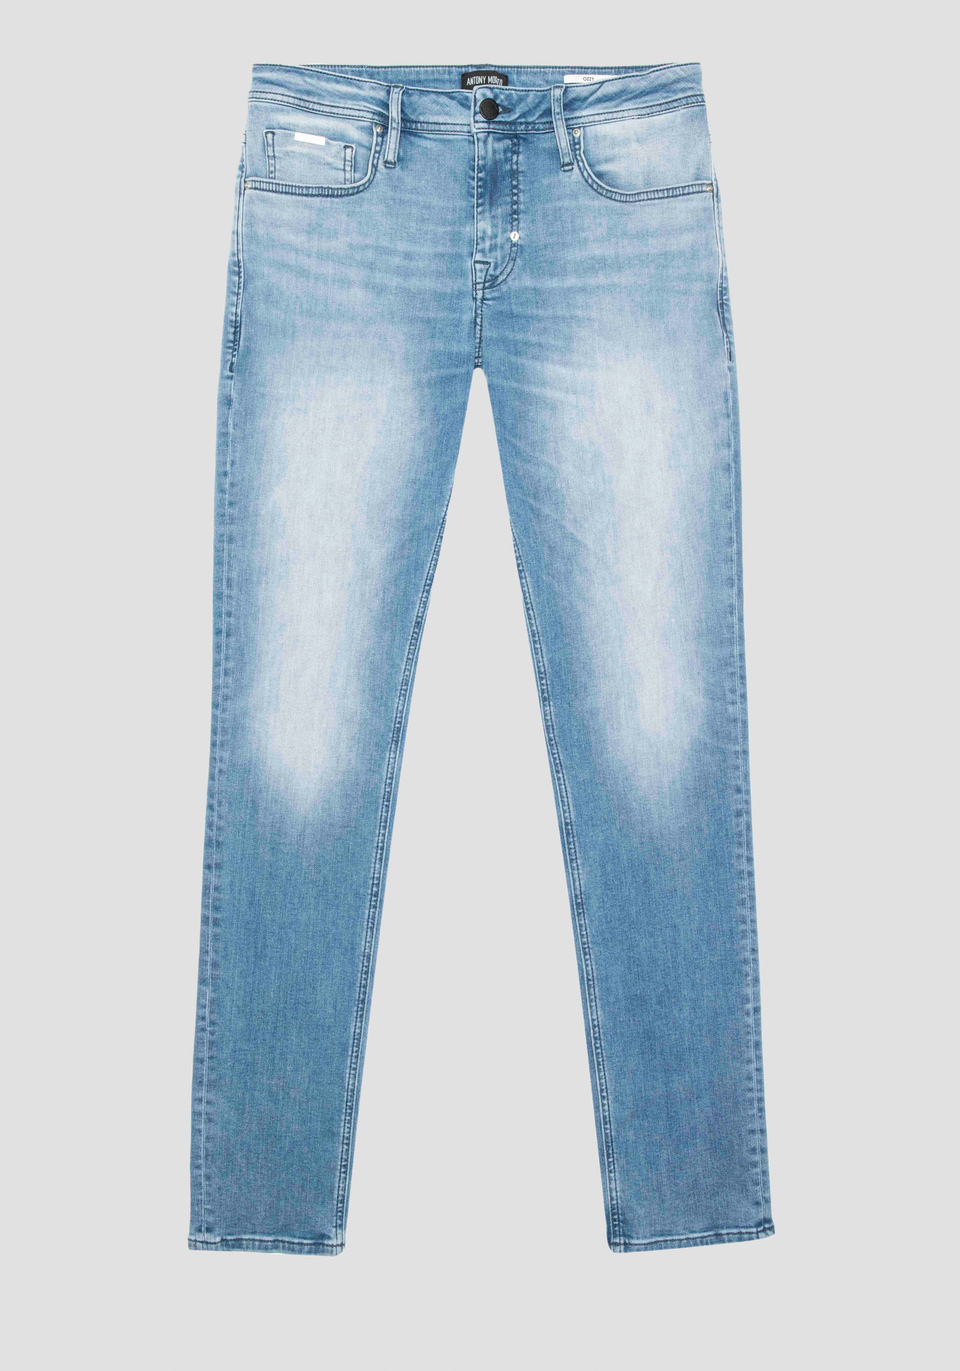 JEANS TAPERED FIT “OZZY” IN DENIM POWER STRETCH CON EFFETTO USED - Antony Morato Online Shop